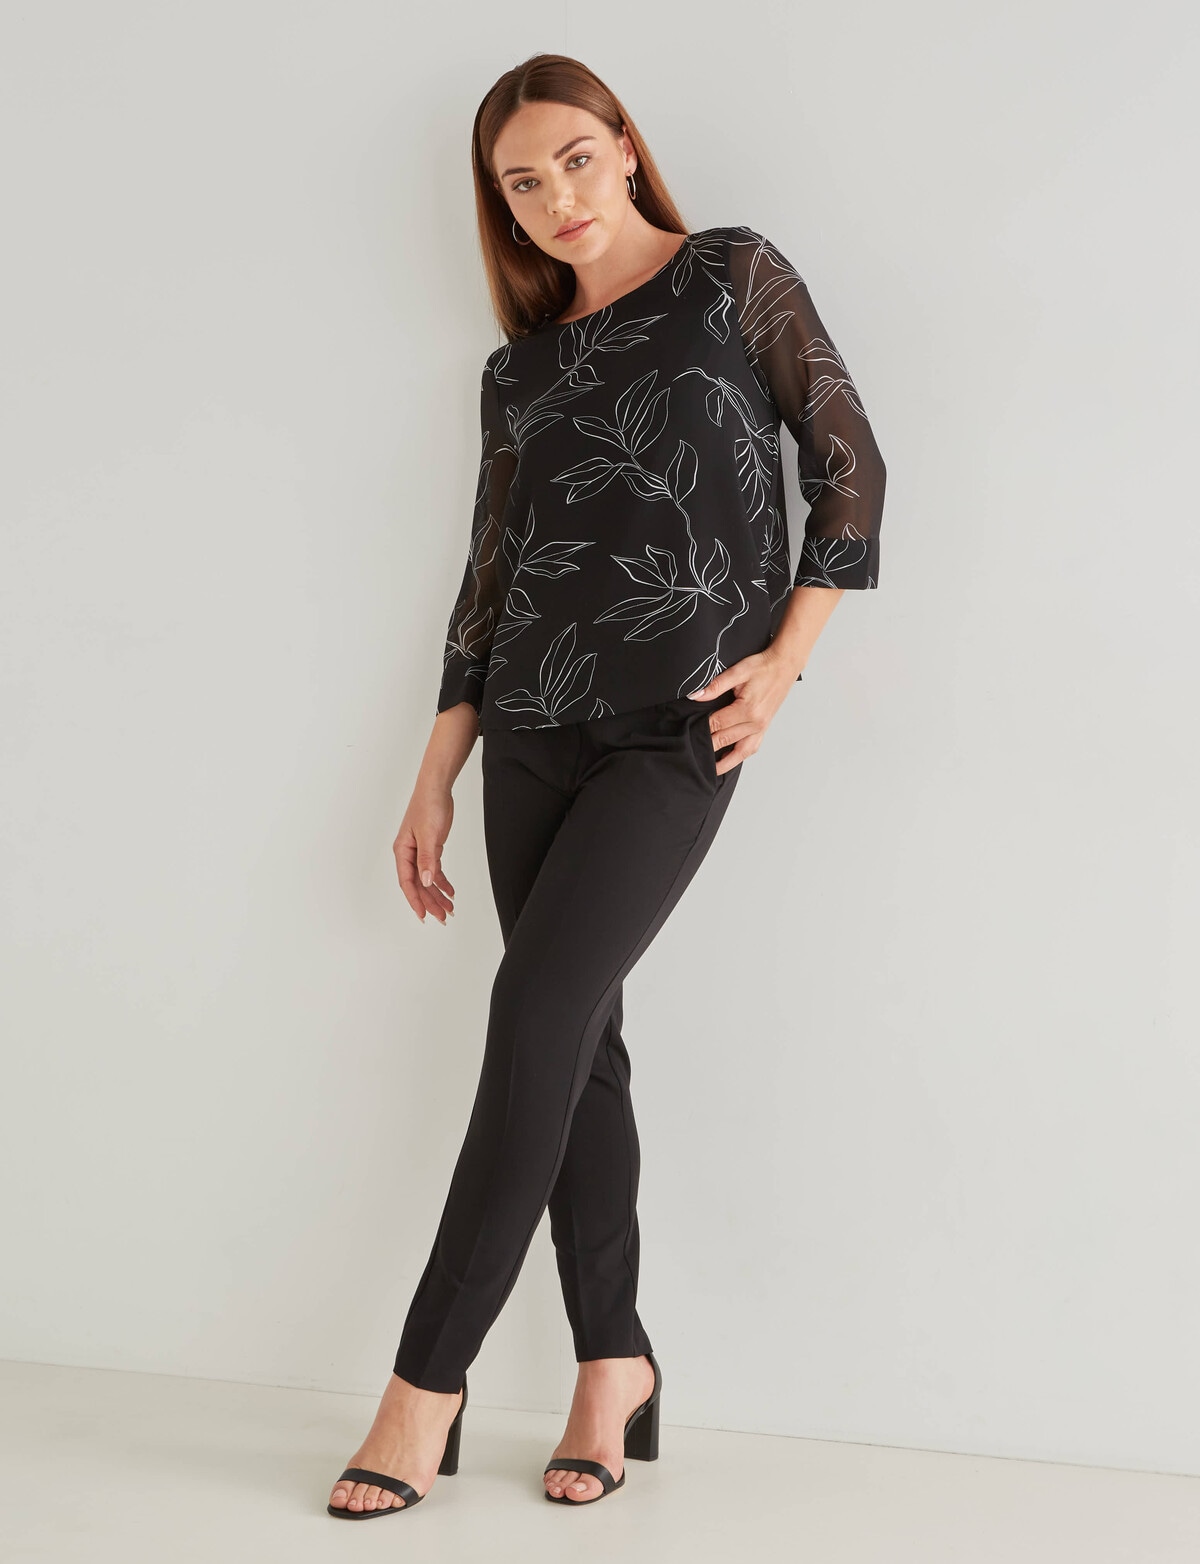 Oliver Black Stencil Floral 3/4 Double Layer Top, Black & White - Tops